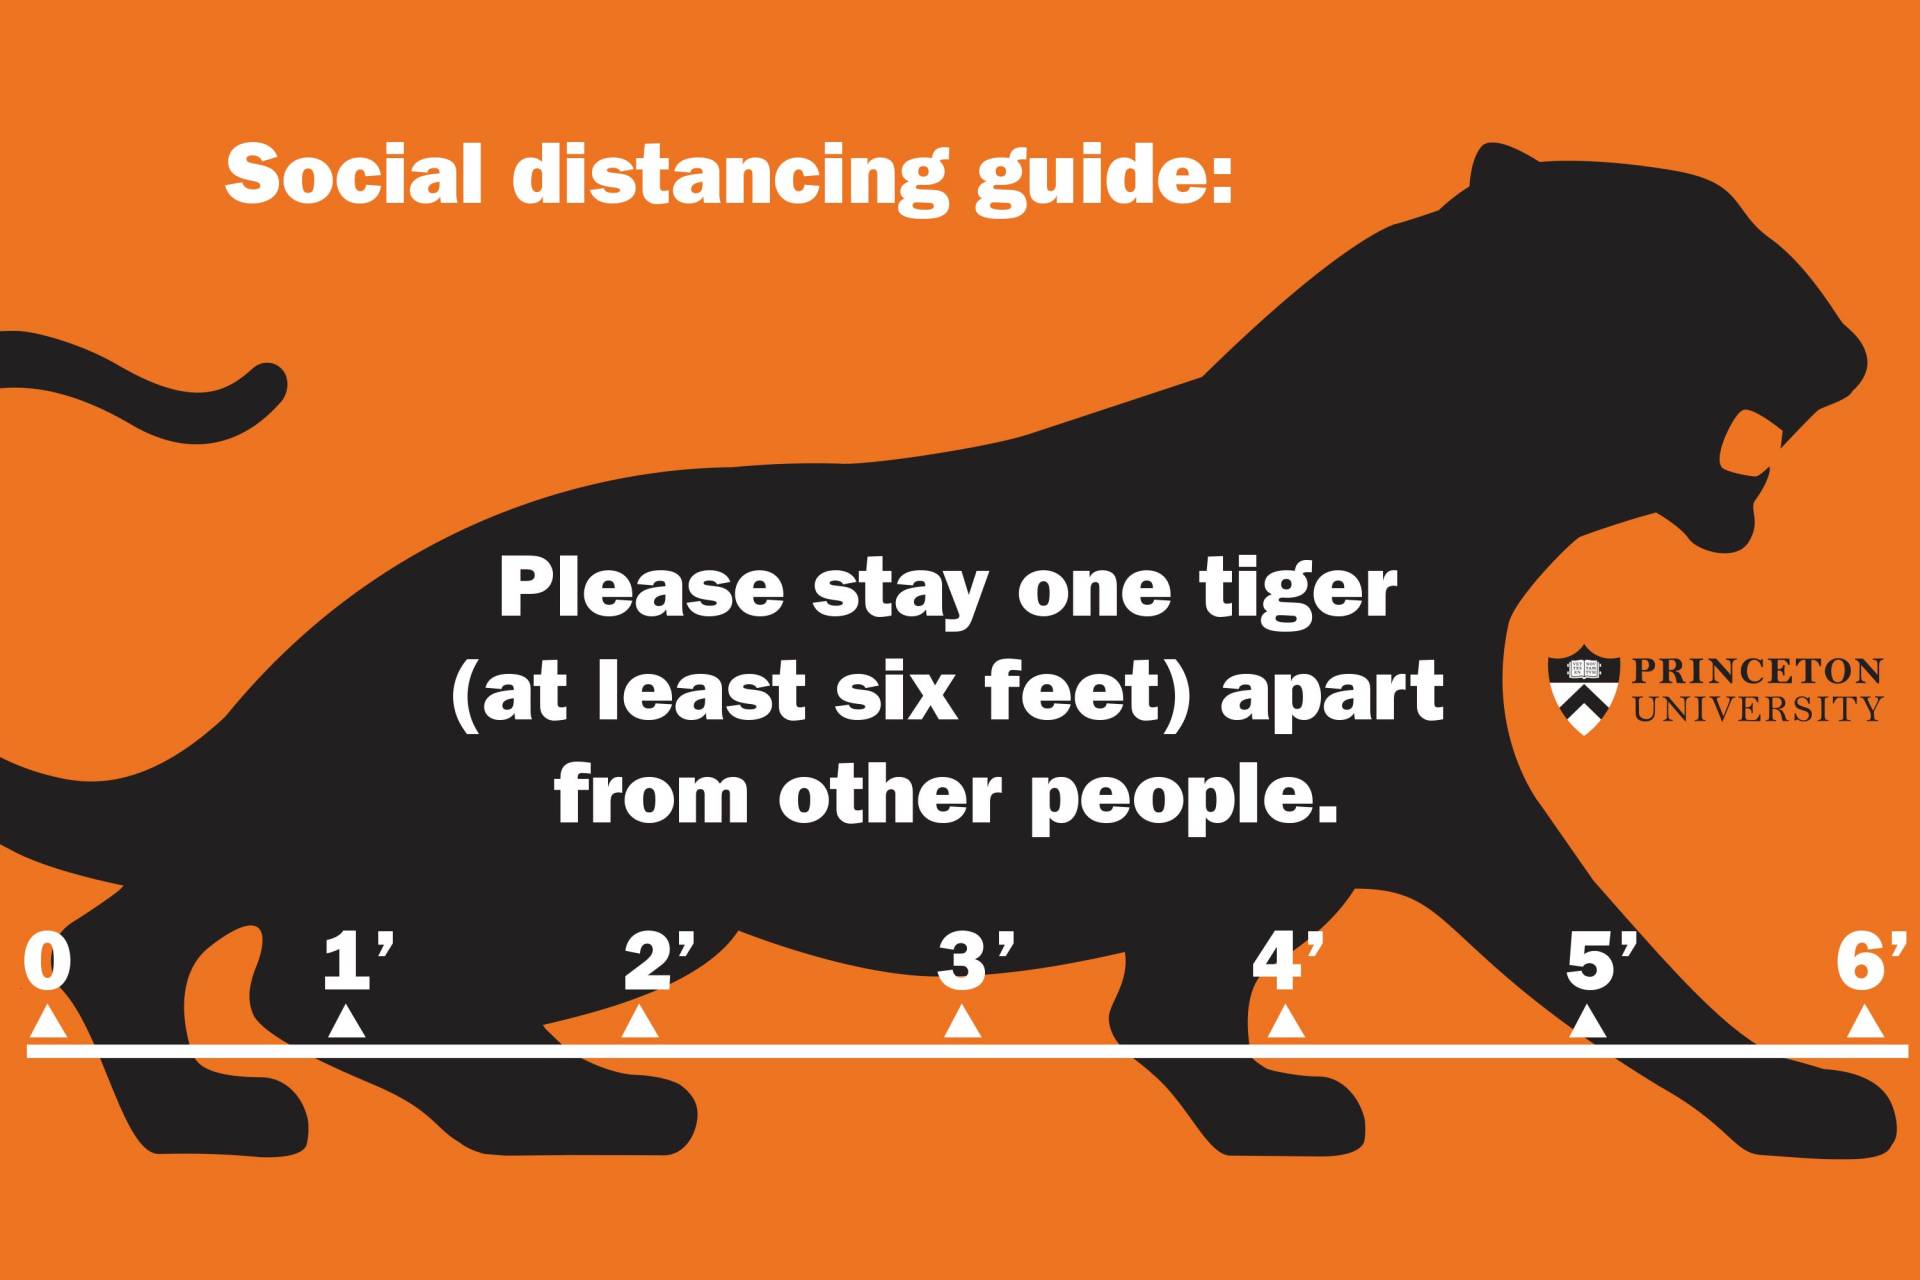 "Social distancing guide: Please stay one tiger (at least 6 feet) apart from other people"